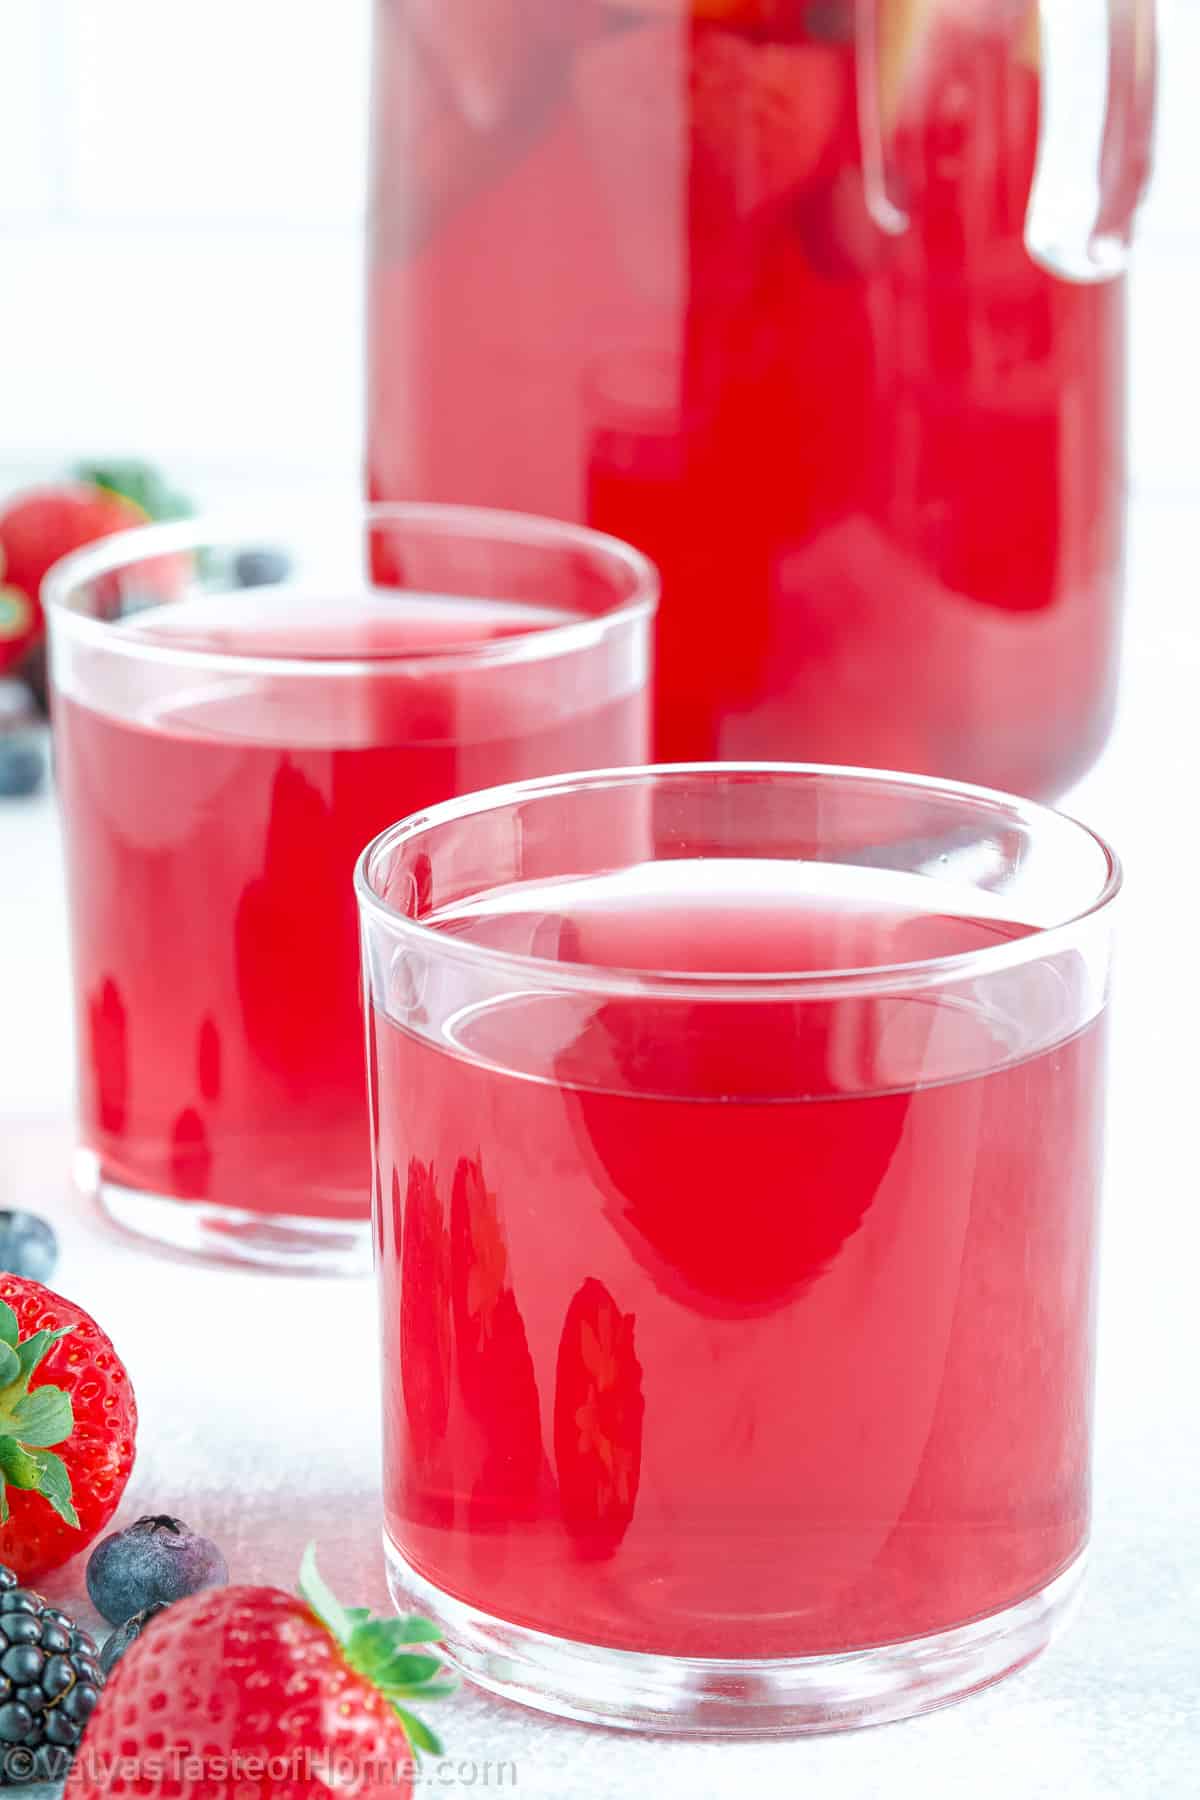 Kompot is a traditional Eastern European fruit drink that every Ukrainian and Russian family makes at home using a combination of simmered fruits. 